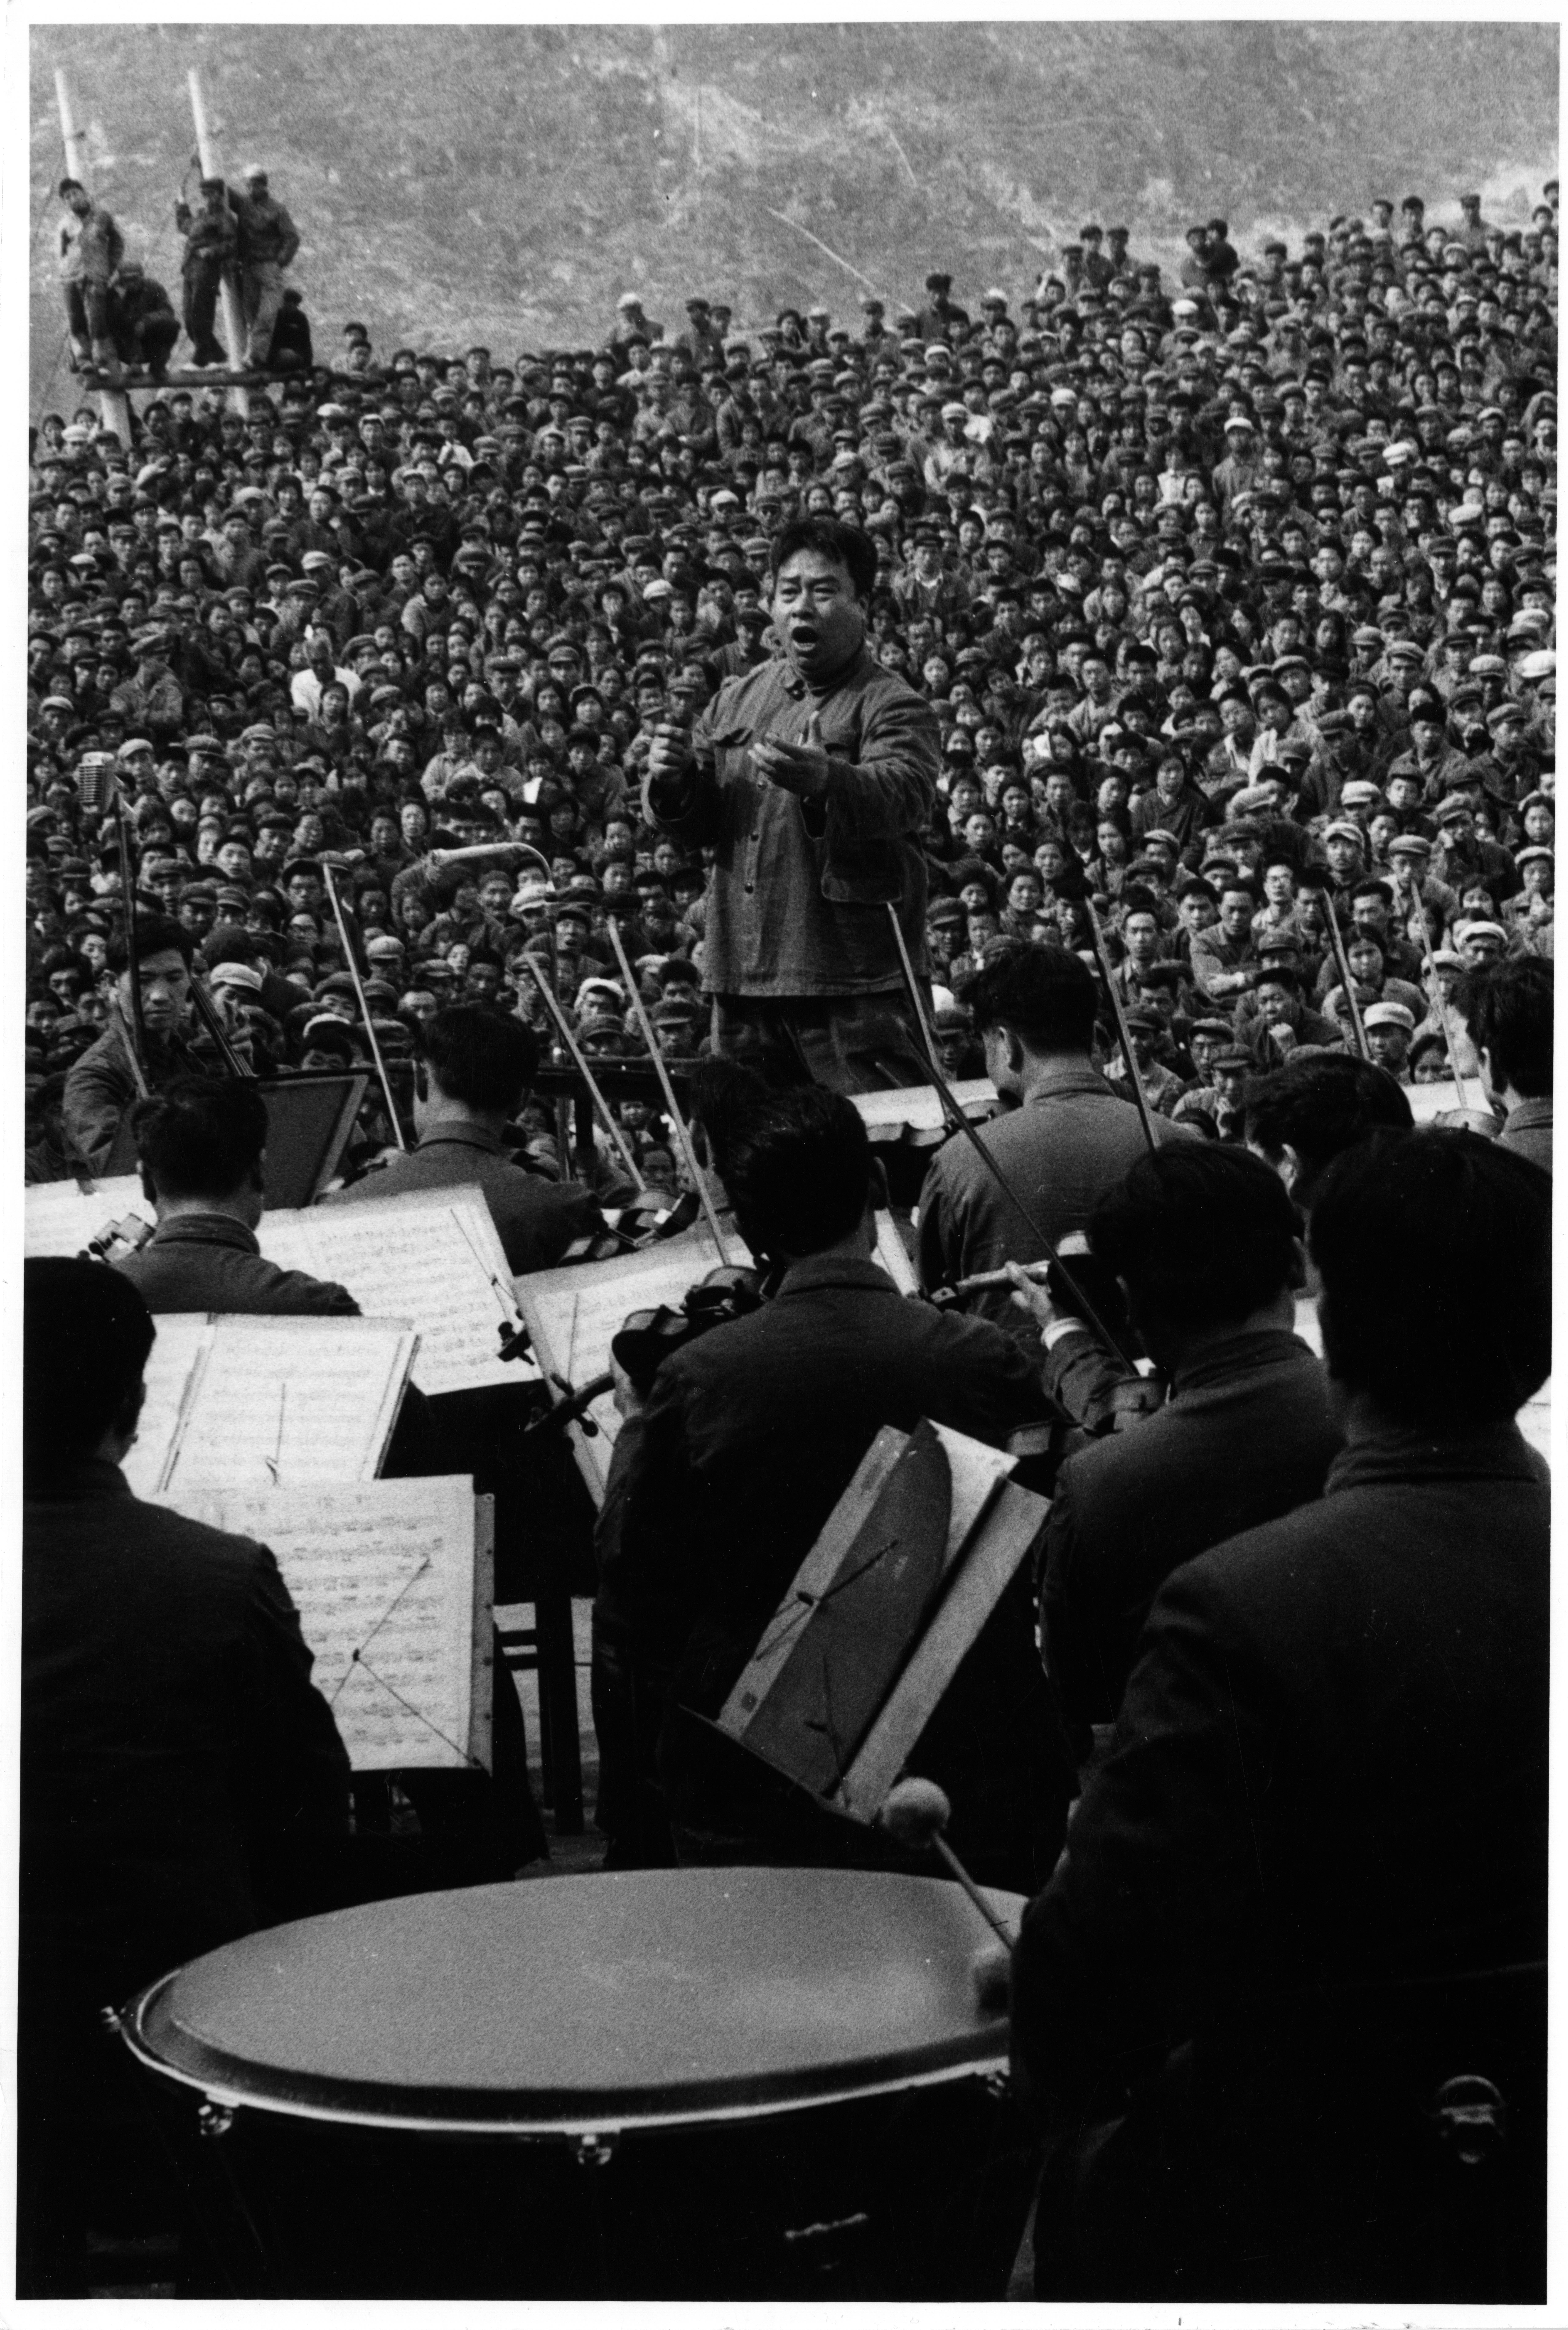 A conductor standing in front of a large crowd, conducting an orchestra.